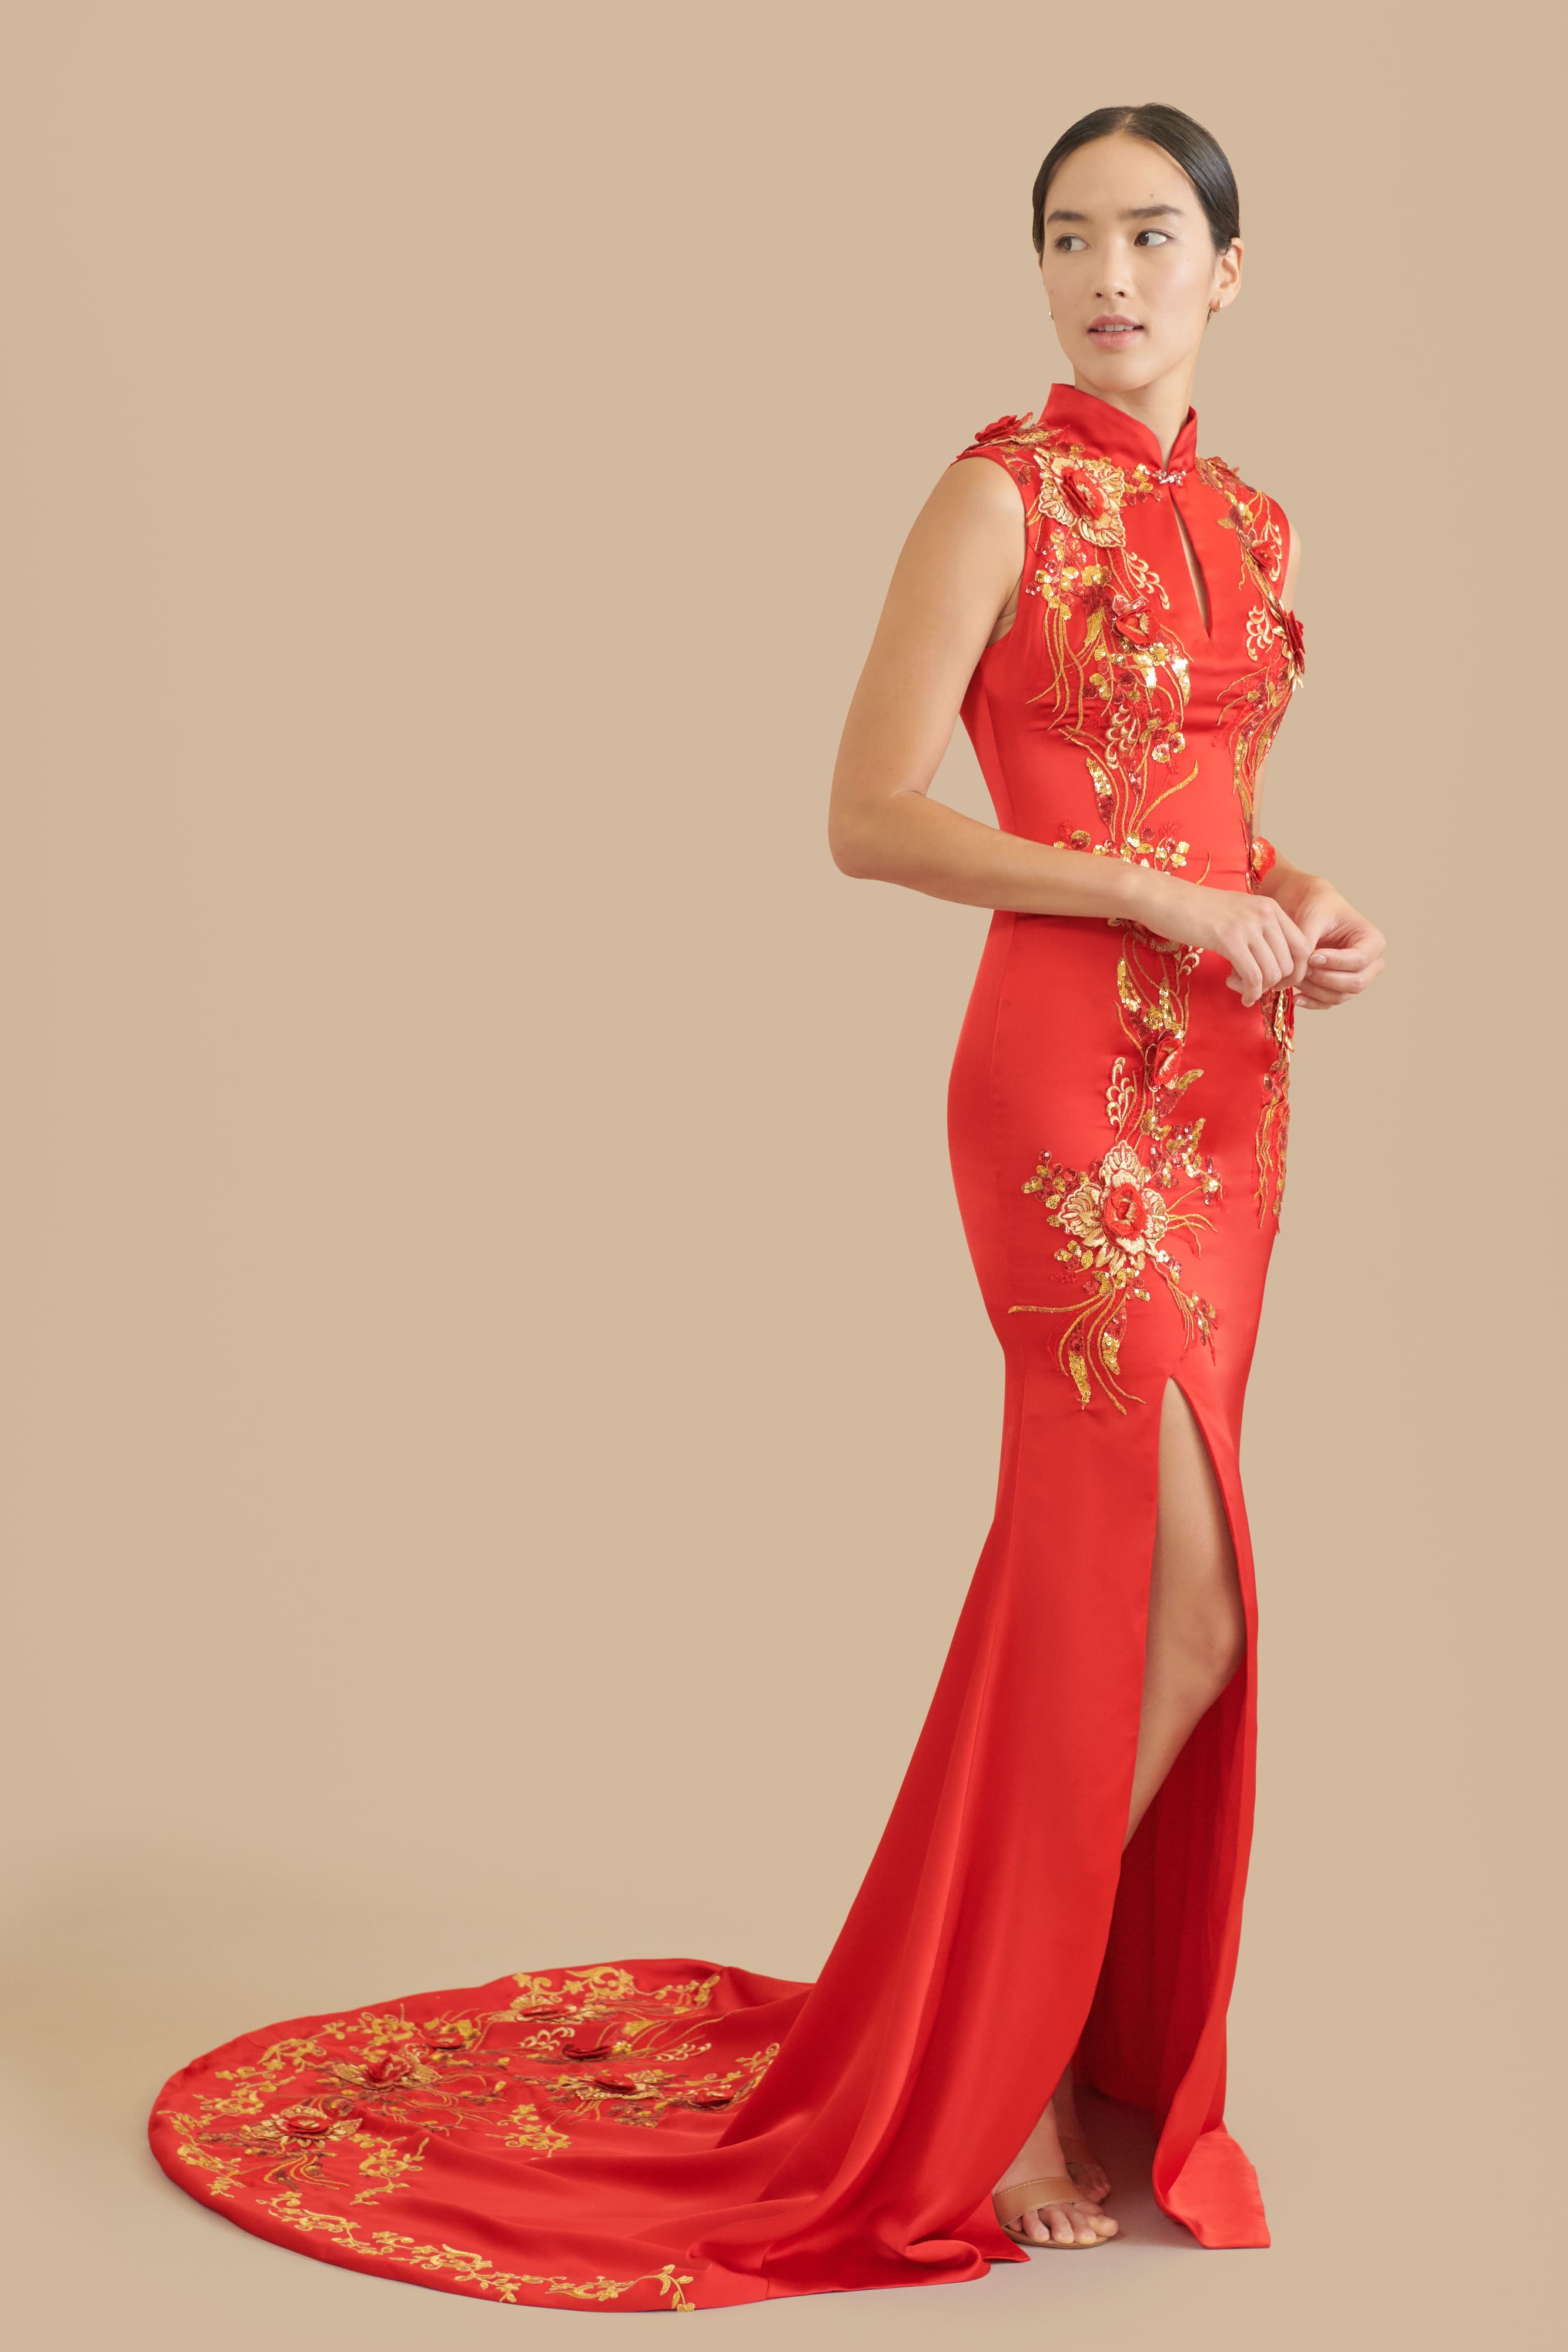 Adaptable Qipao for Different Settings